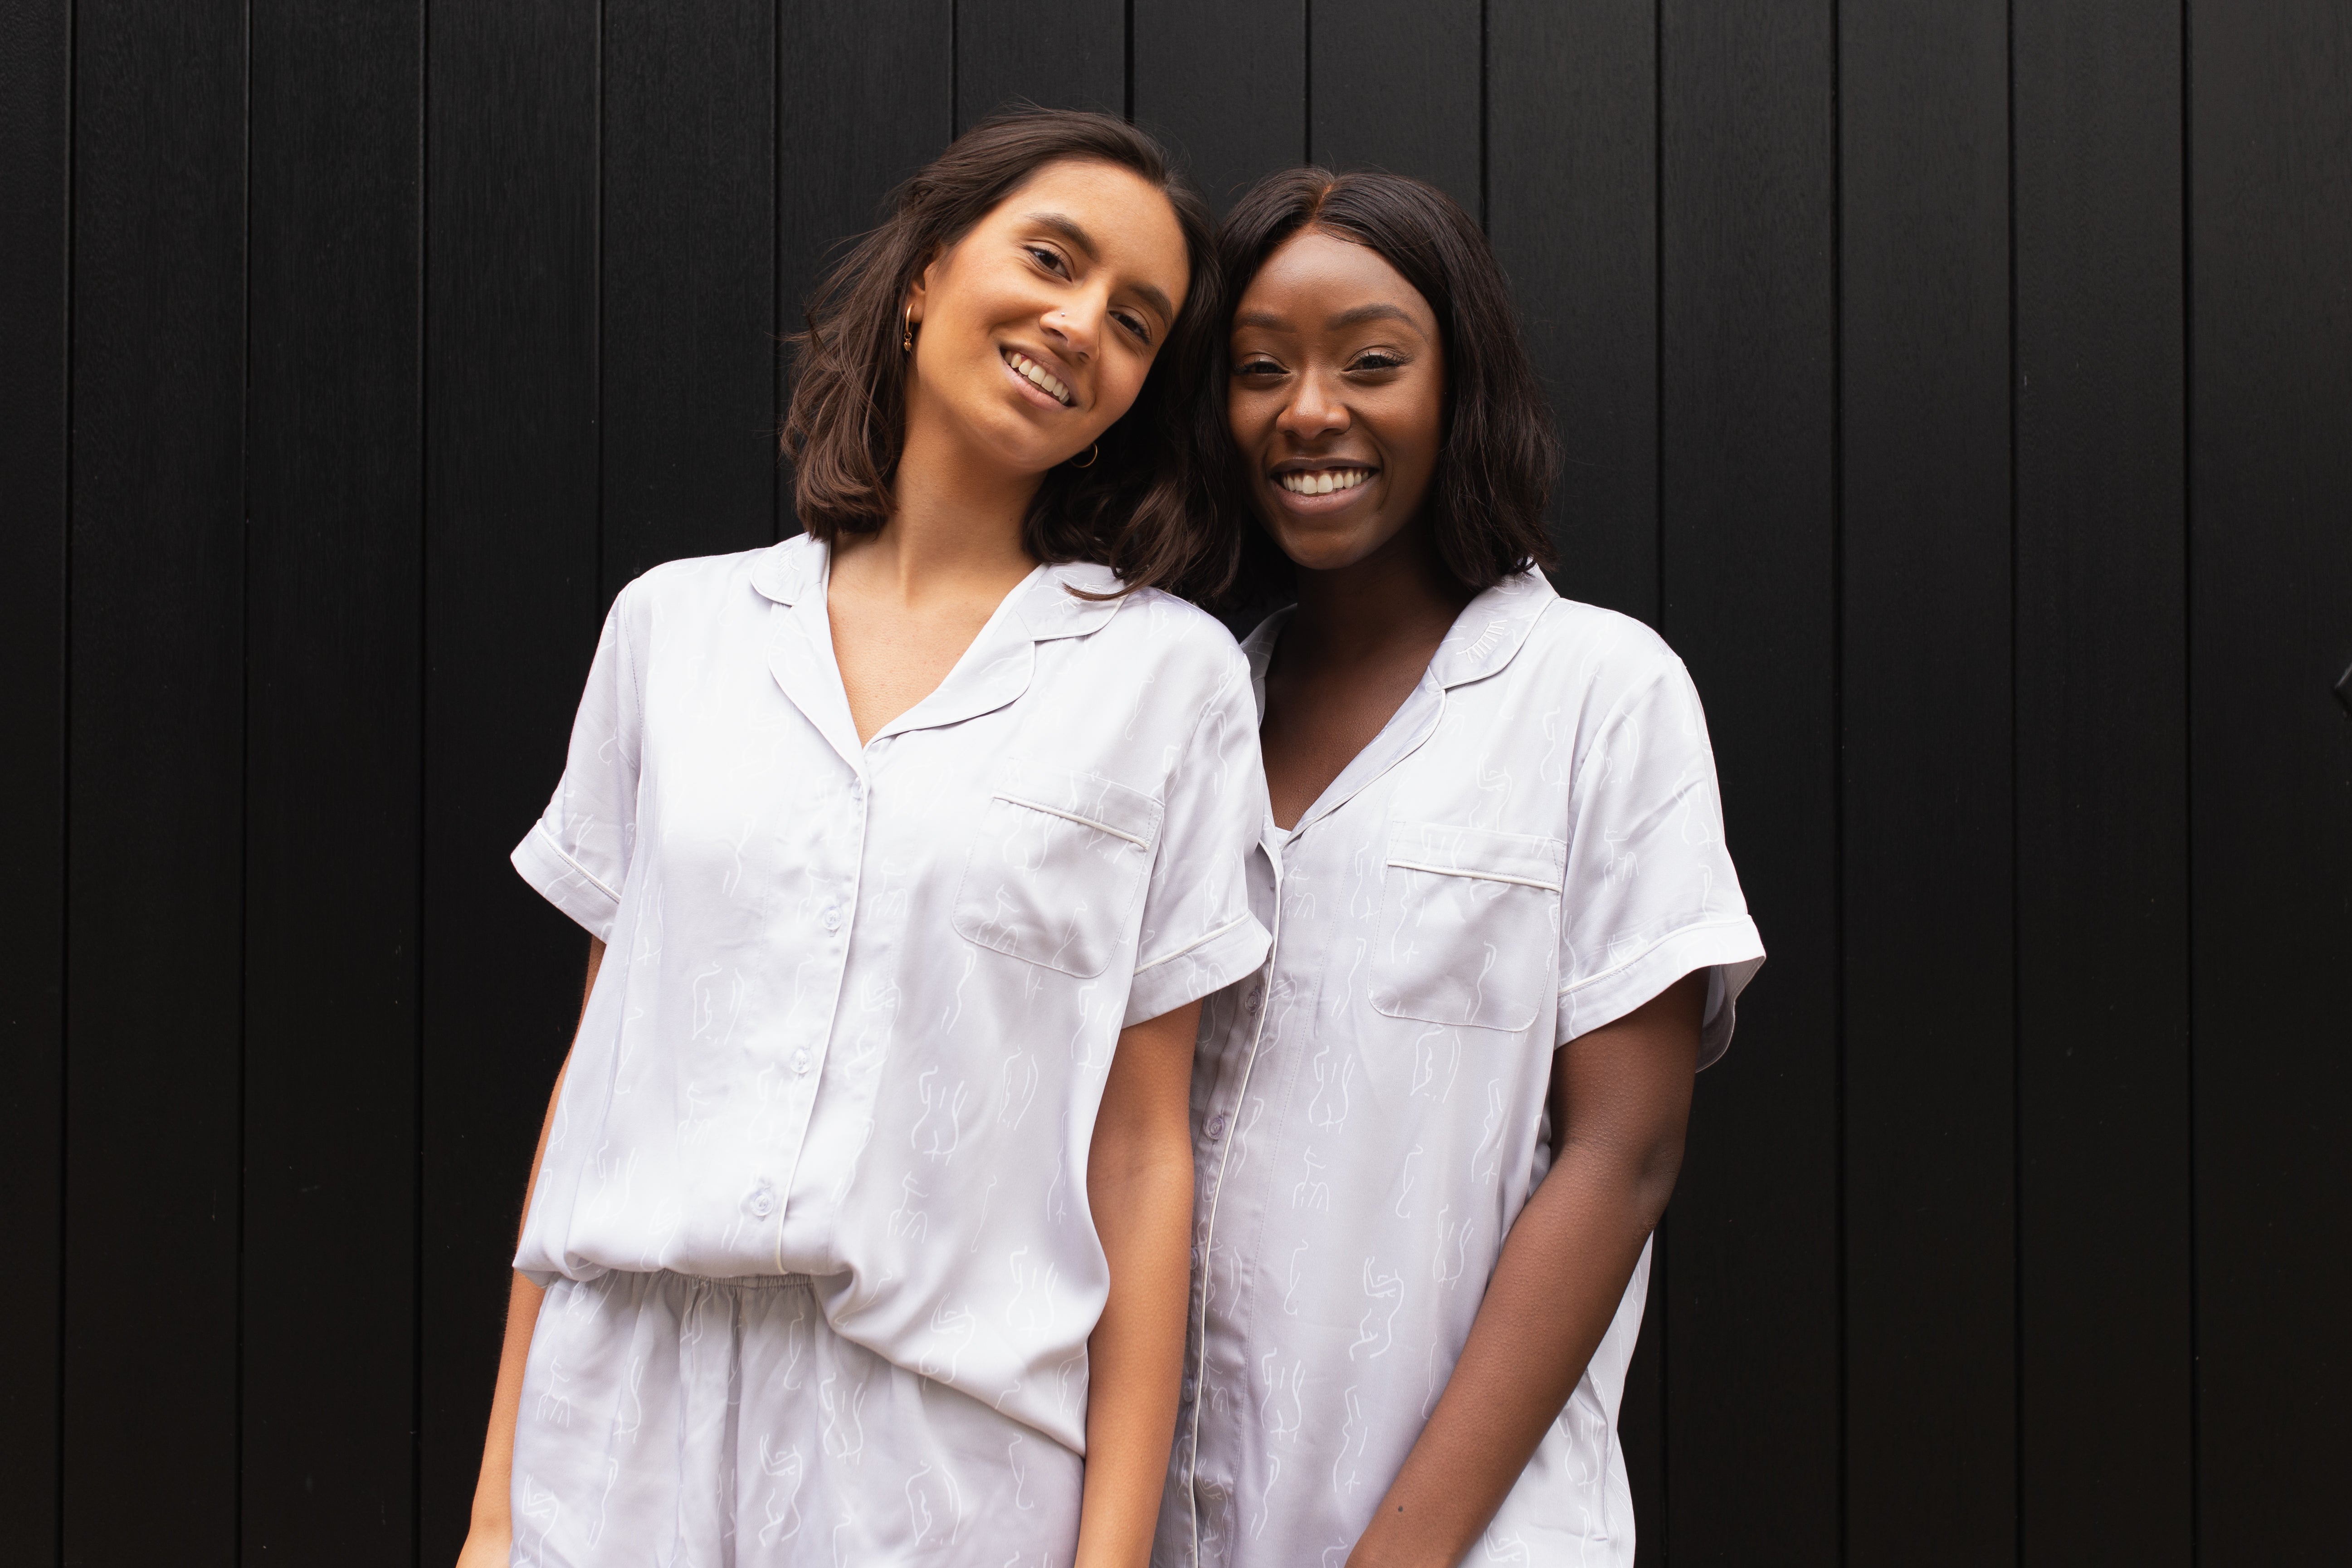 Short Sleepwear sets subtly patterned and small batch made